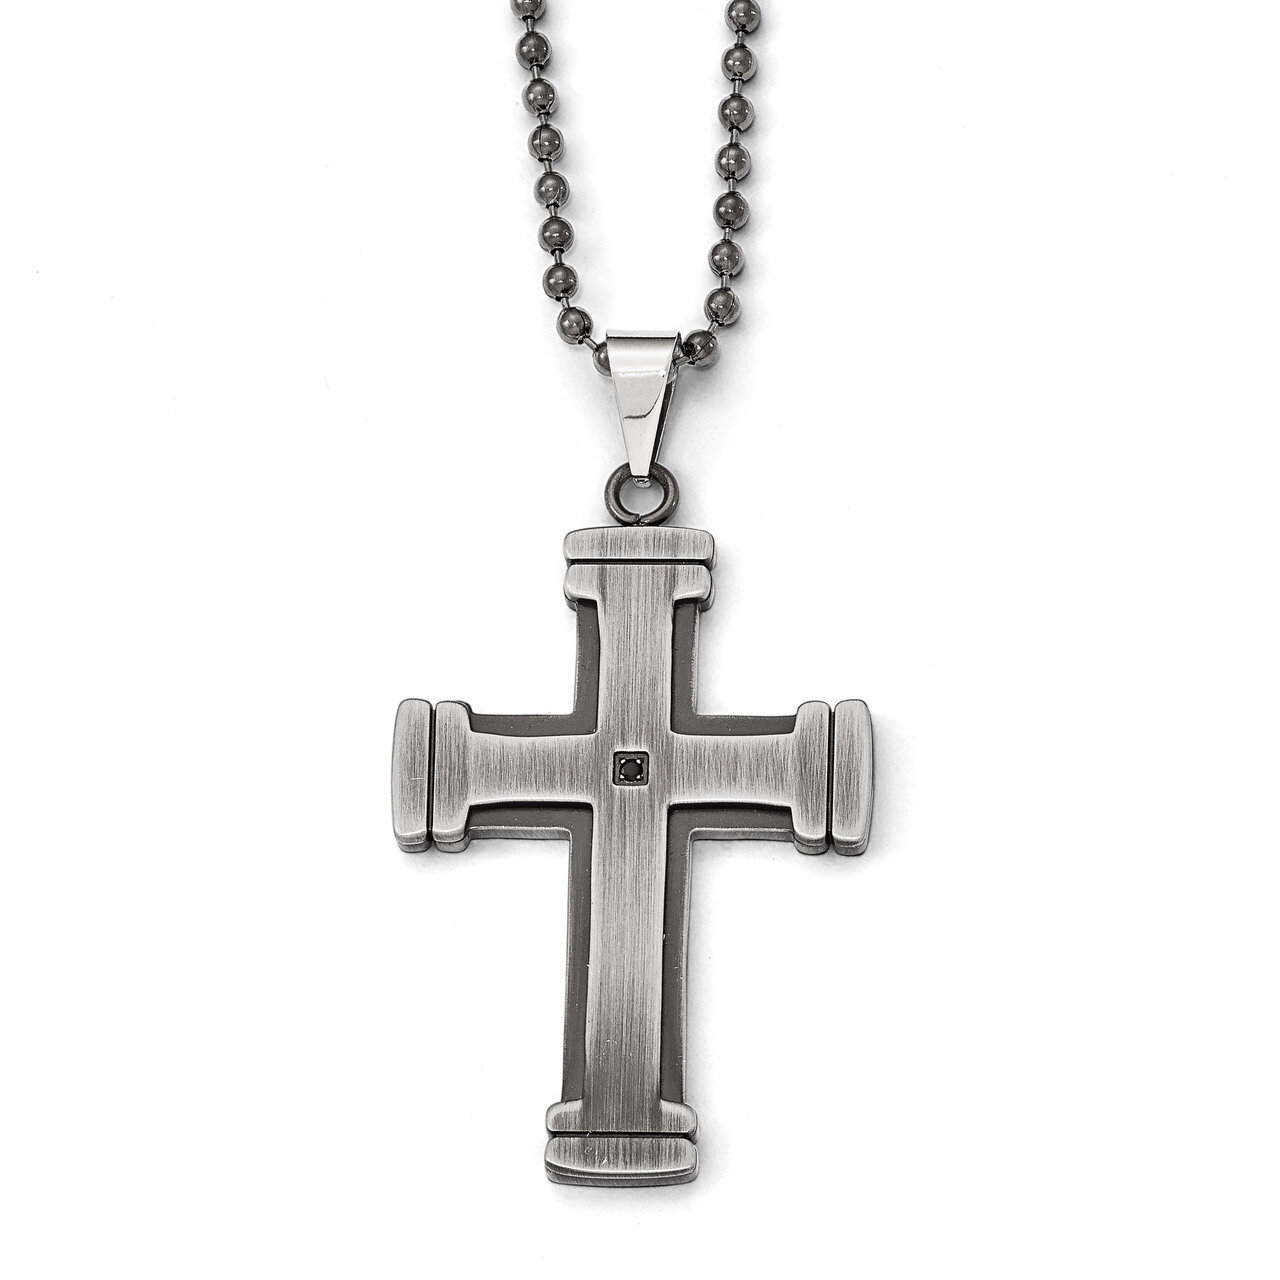 Antiqued Polished and Brushed Synthetic Diamond Cross Necklace - Stainless Steel SRN1823-22